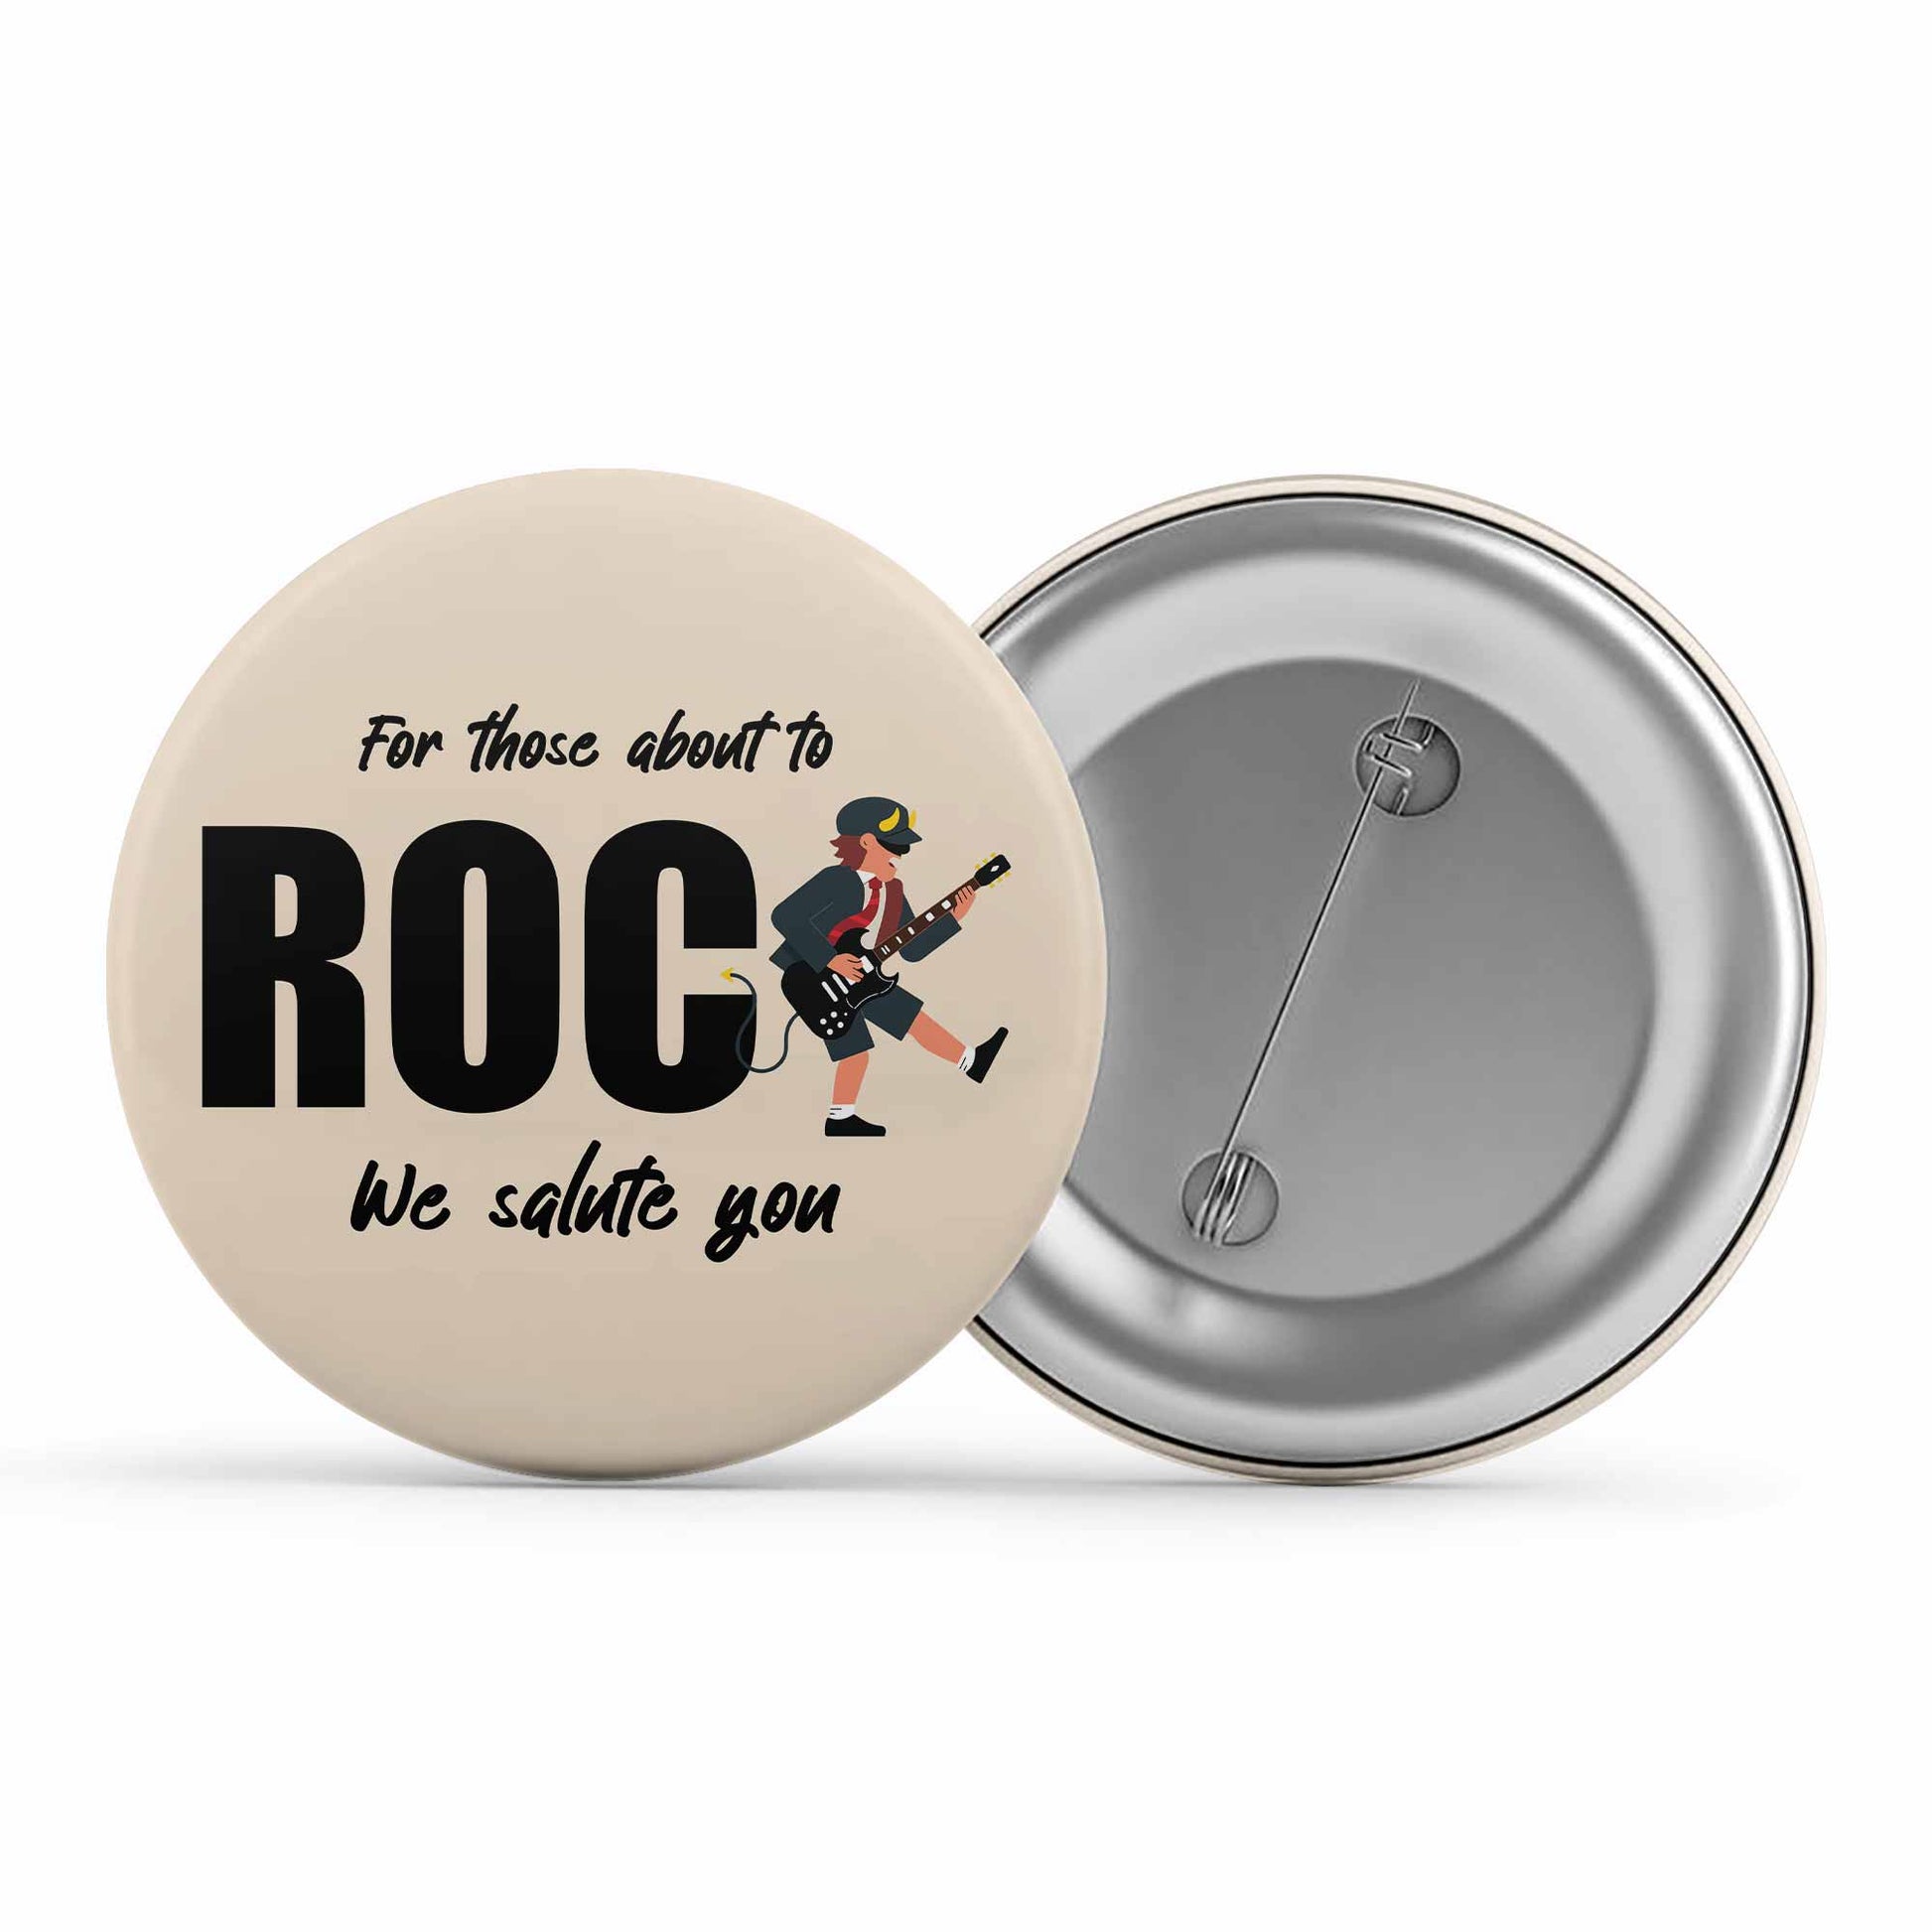 ac/dc for those about to rock badge pin button music band buy online india the banyan tee tbt men women girls boys unisex